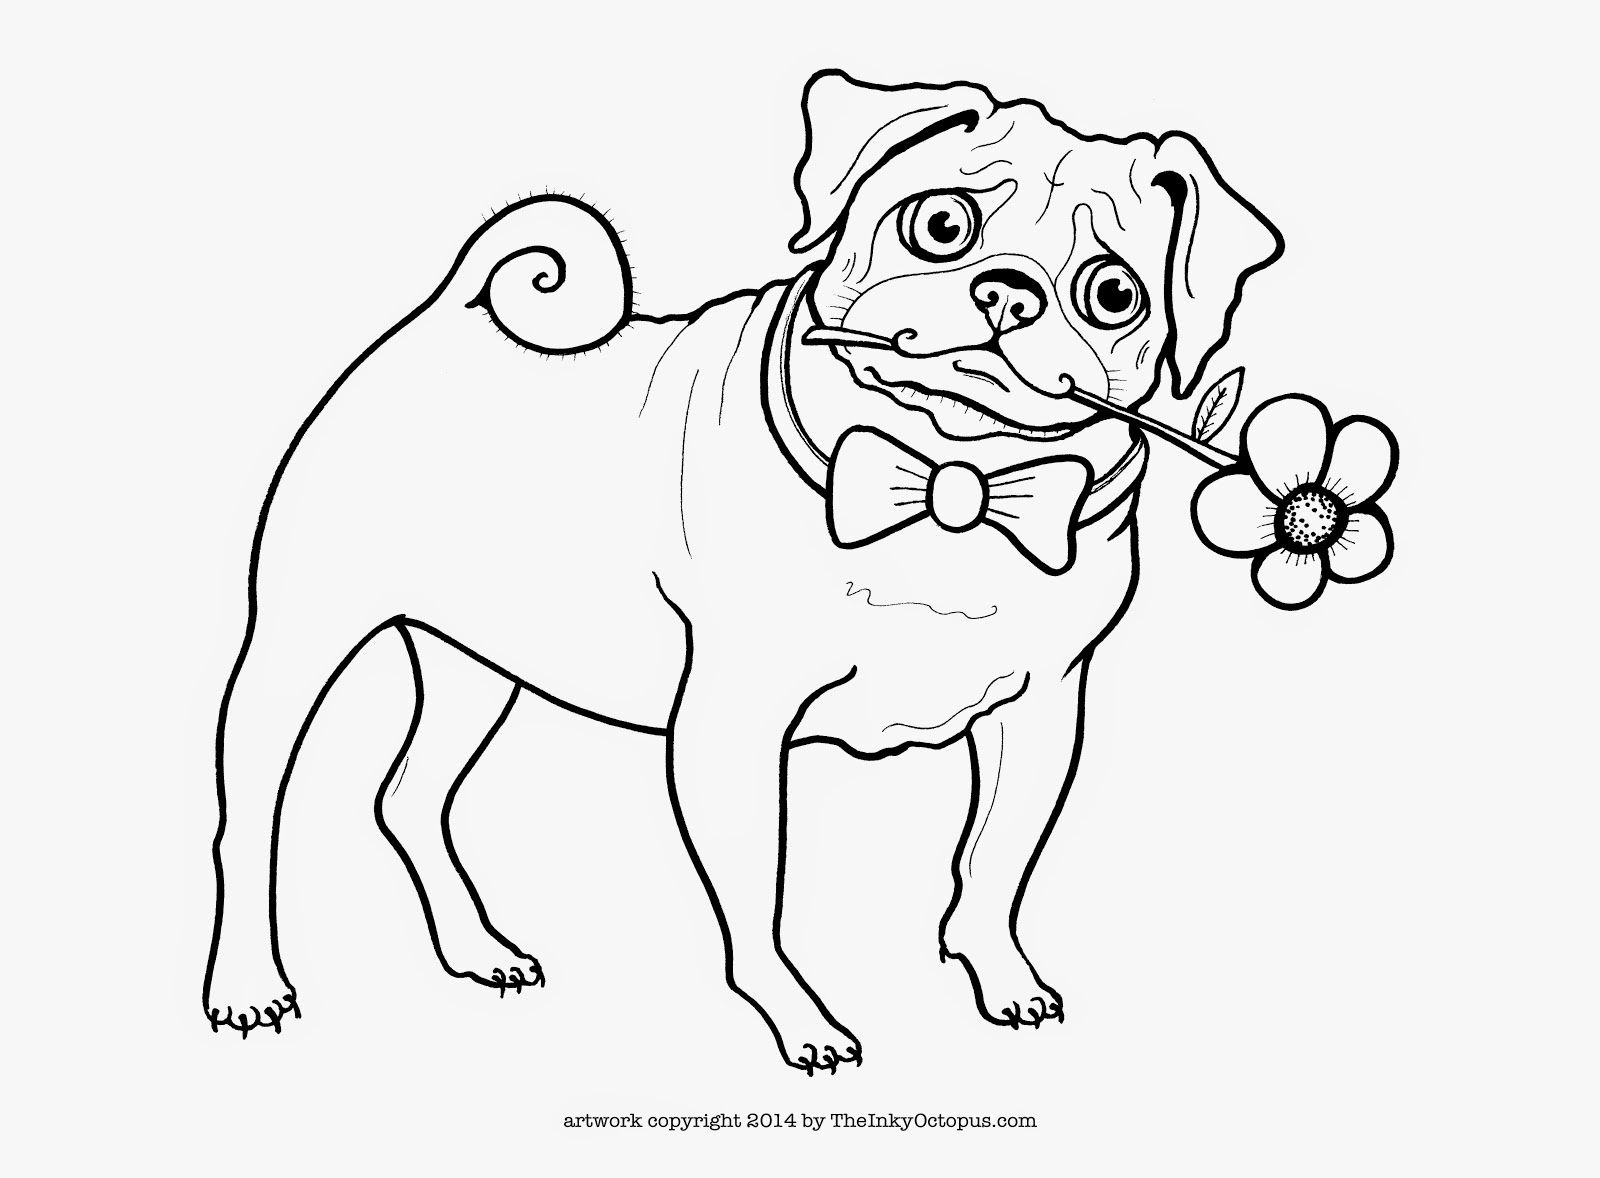 21 Free Pictures for: Pug Coloring Pages. Temoon.us